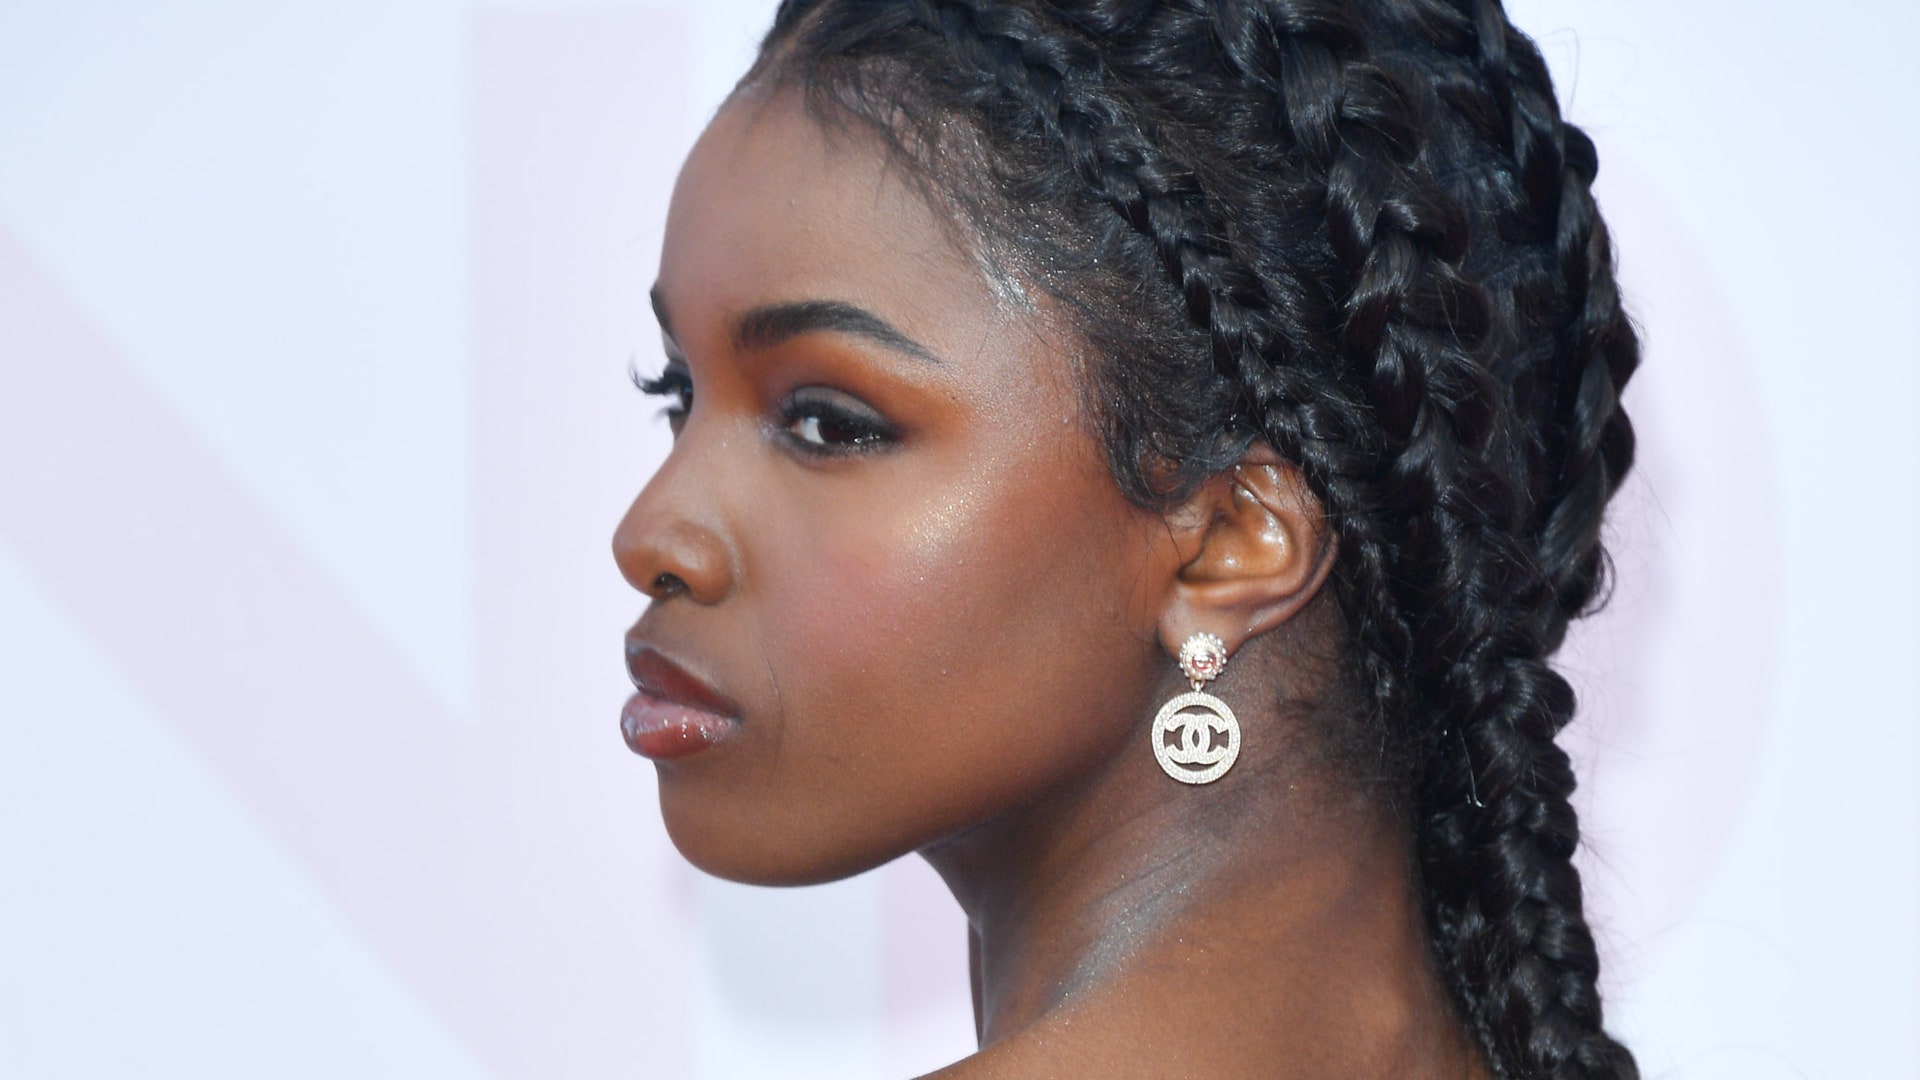 Leomie Anderson Height Feet Inches cm Weight Body Measurements